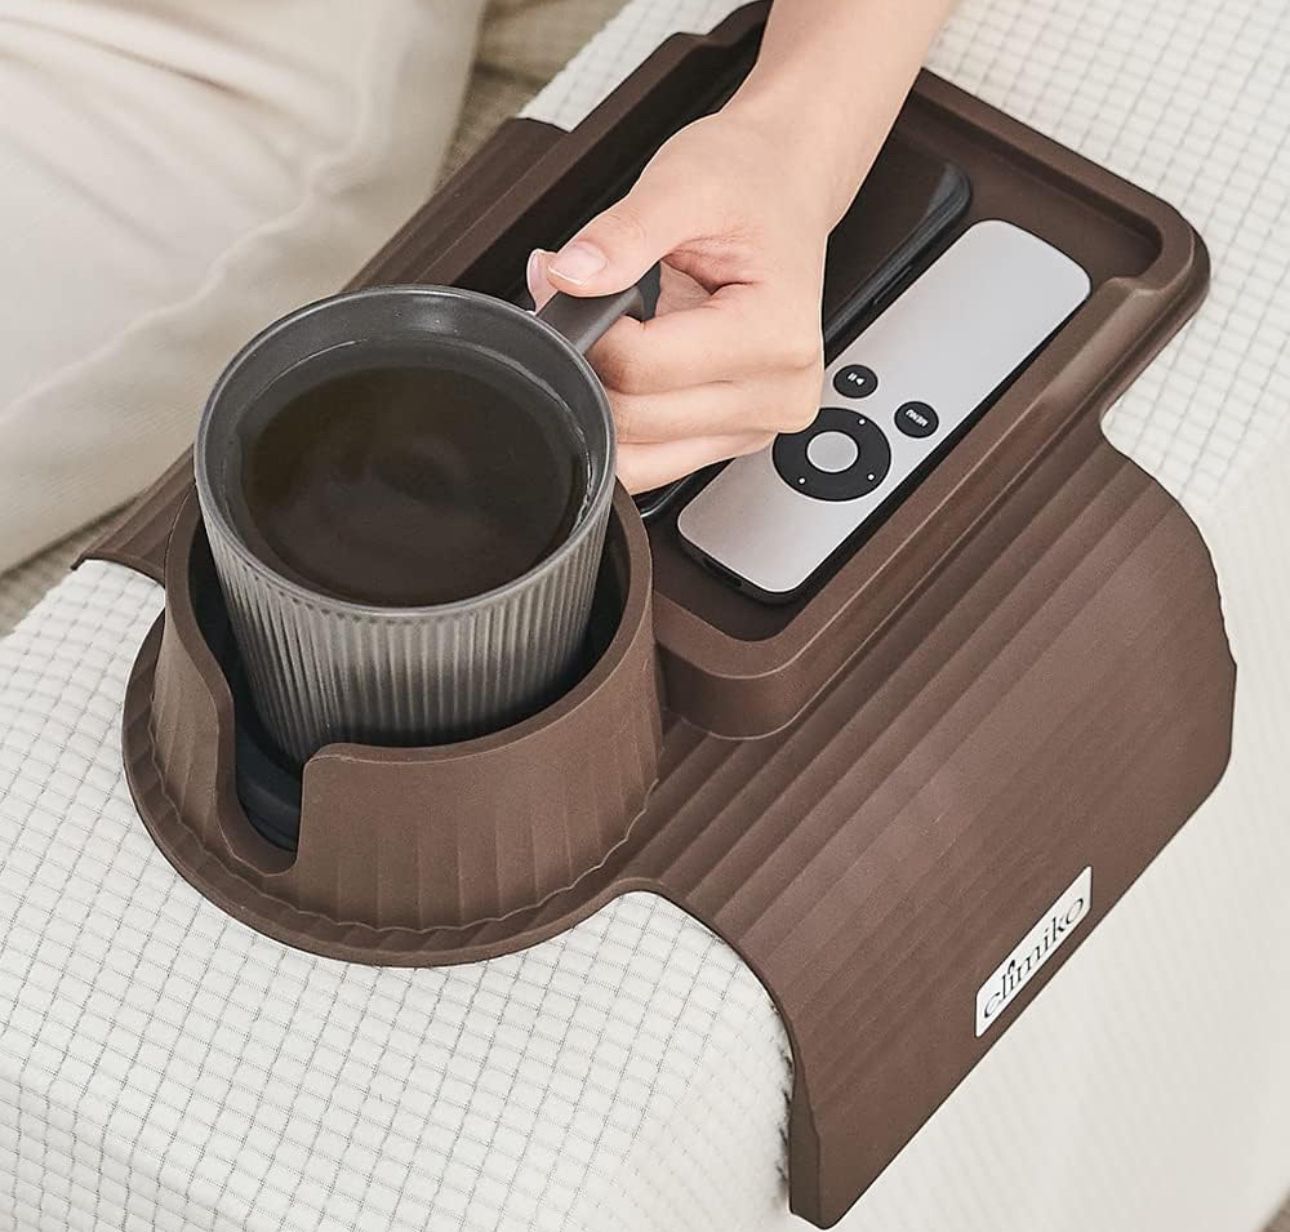 Couch Cup Holder Tray, Elimiko Silicone Sofa Drink Holder with Large Cup Holder and Tray, for Oversized Mugs/Long Remote/Snacks/Cellphone, Gifts for M